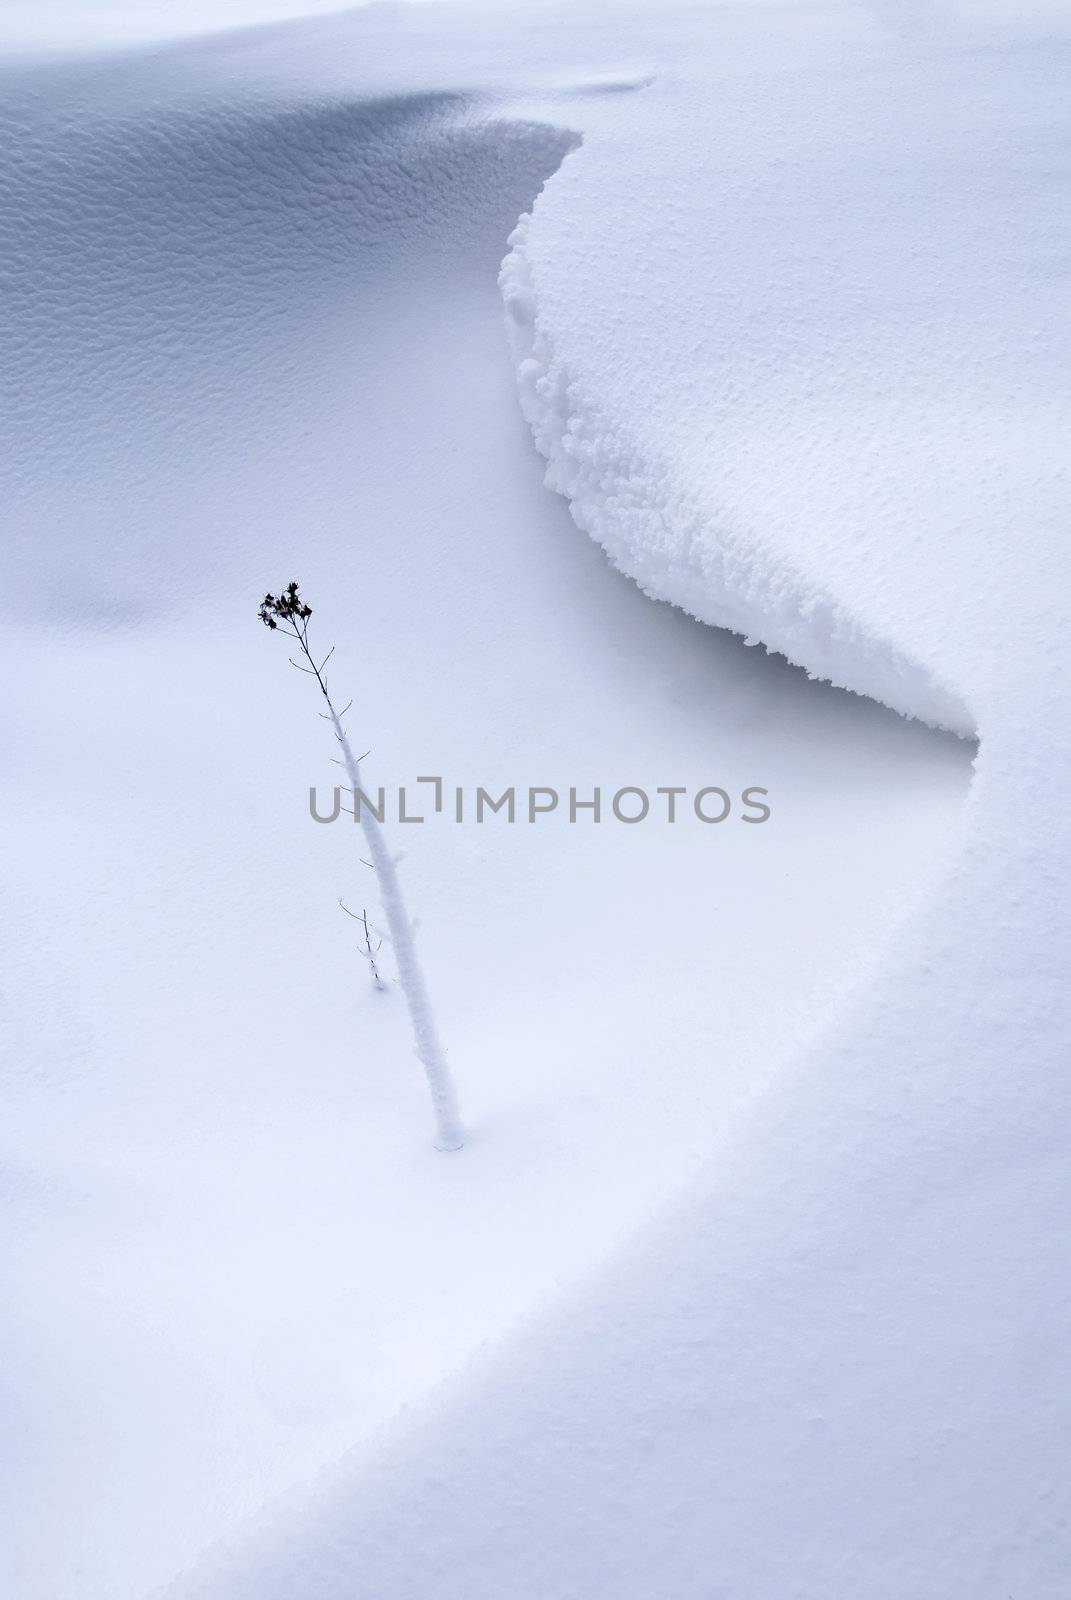 Beautiful minimalistic snowy background with a single frozen weed stalk